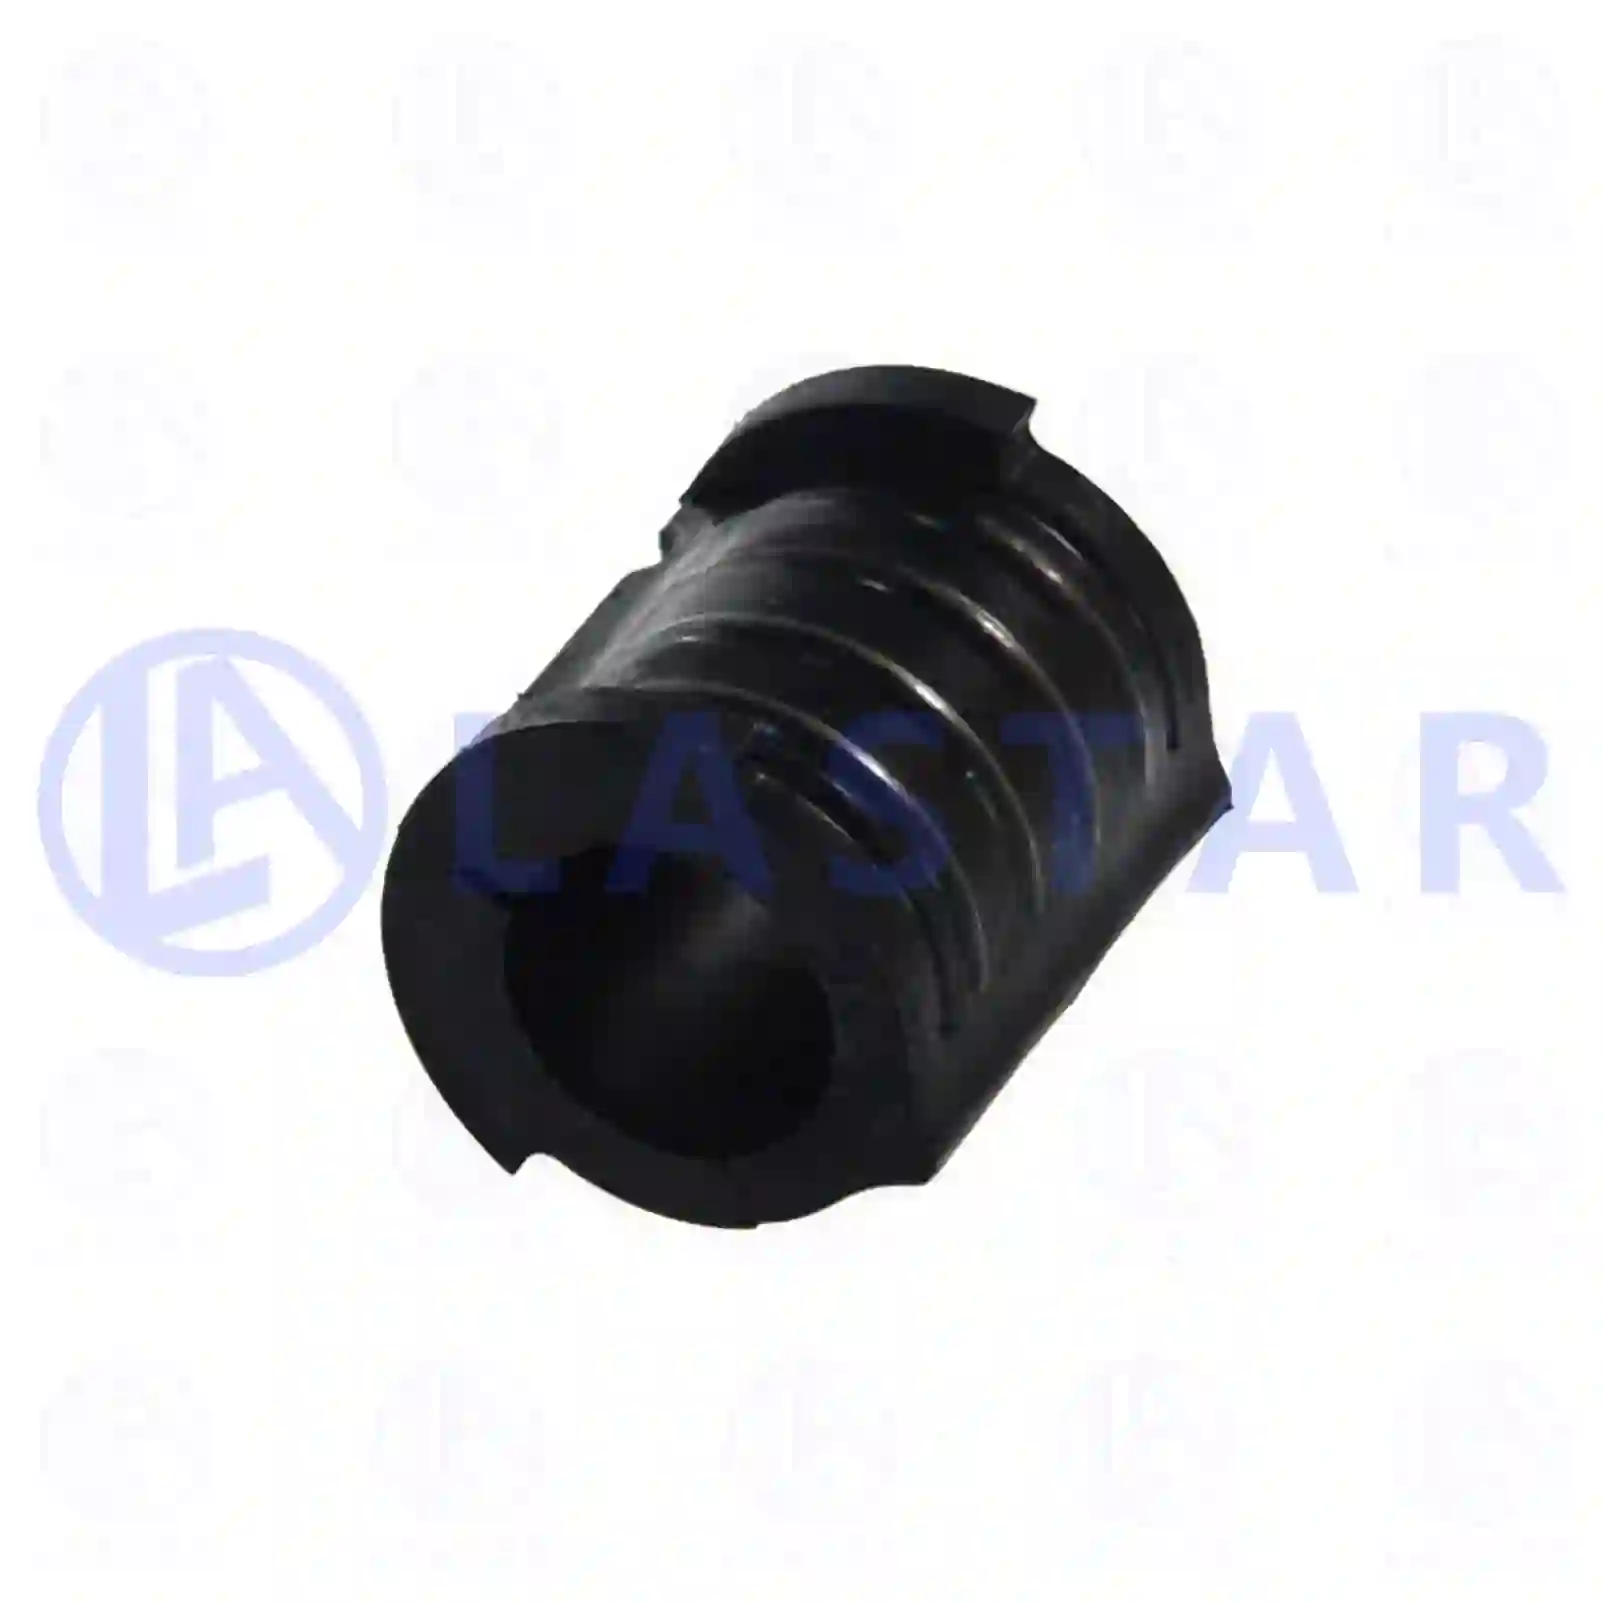 Bushing, stabilizer, 77729652, 1075187, , , ||  77729652 Lastar Spare Part | Truck Spare Parts, Auotomotive Spare Parts Bushing, stabilizer, 77729652, 1075187, , , ||  77729652 Lastar Spare Part | Truck Spare Parts, Auotomotive Spare Parts